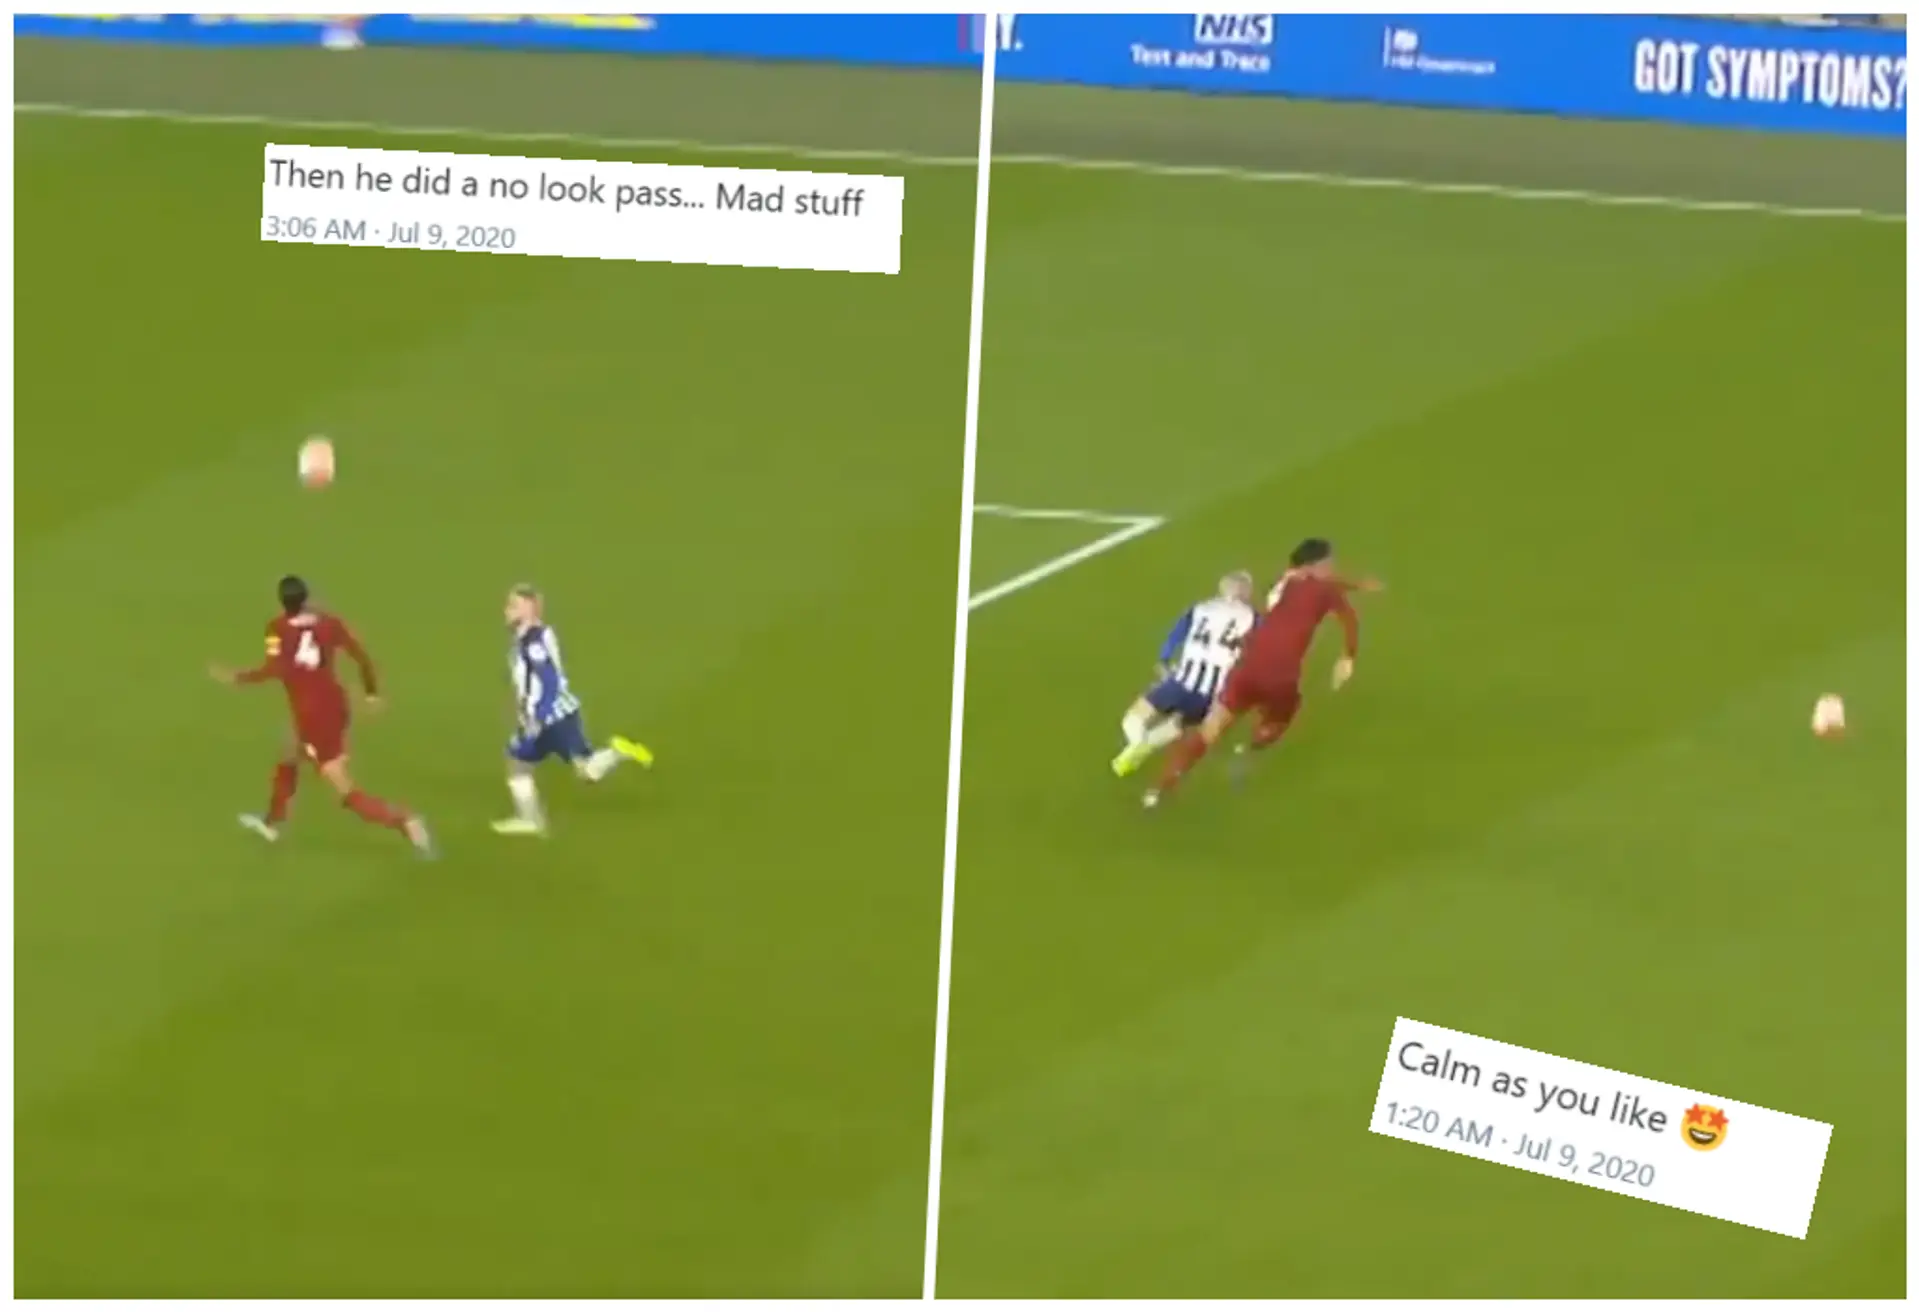 Virgil Van Dijk heads the ball to himself and makes a no-look pass to embarrass Brighton's forward